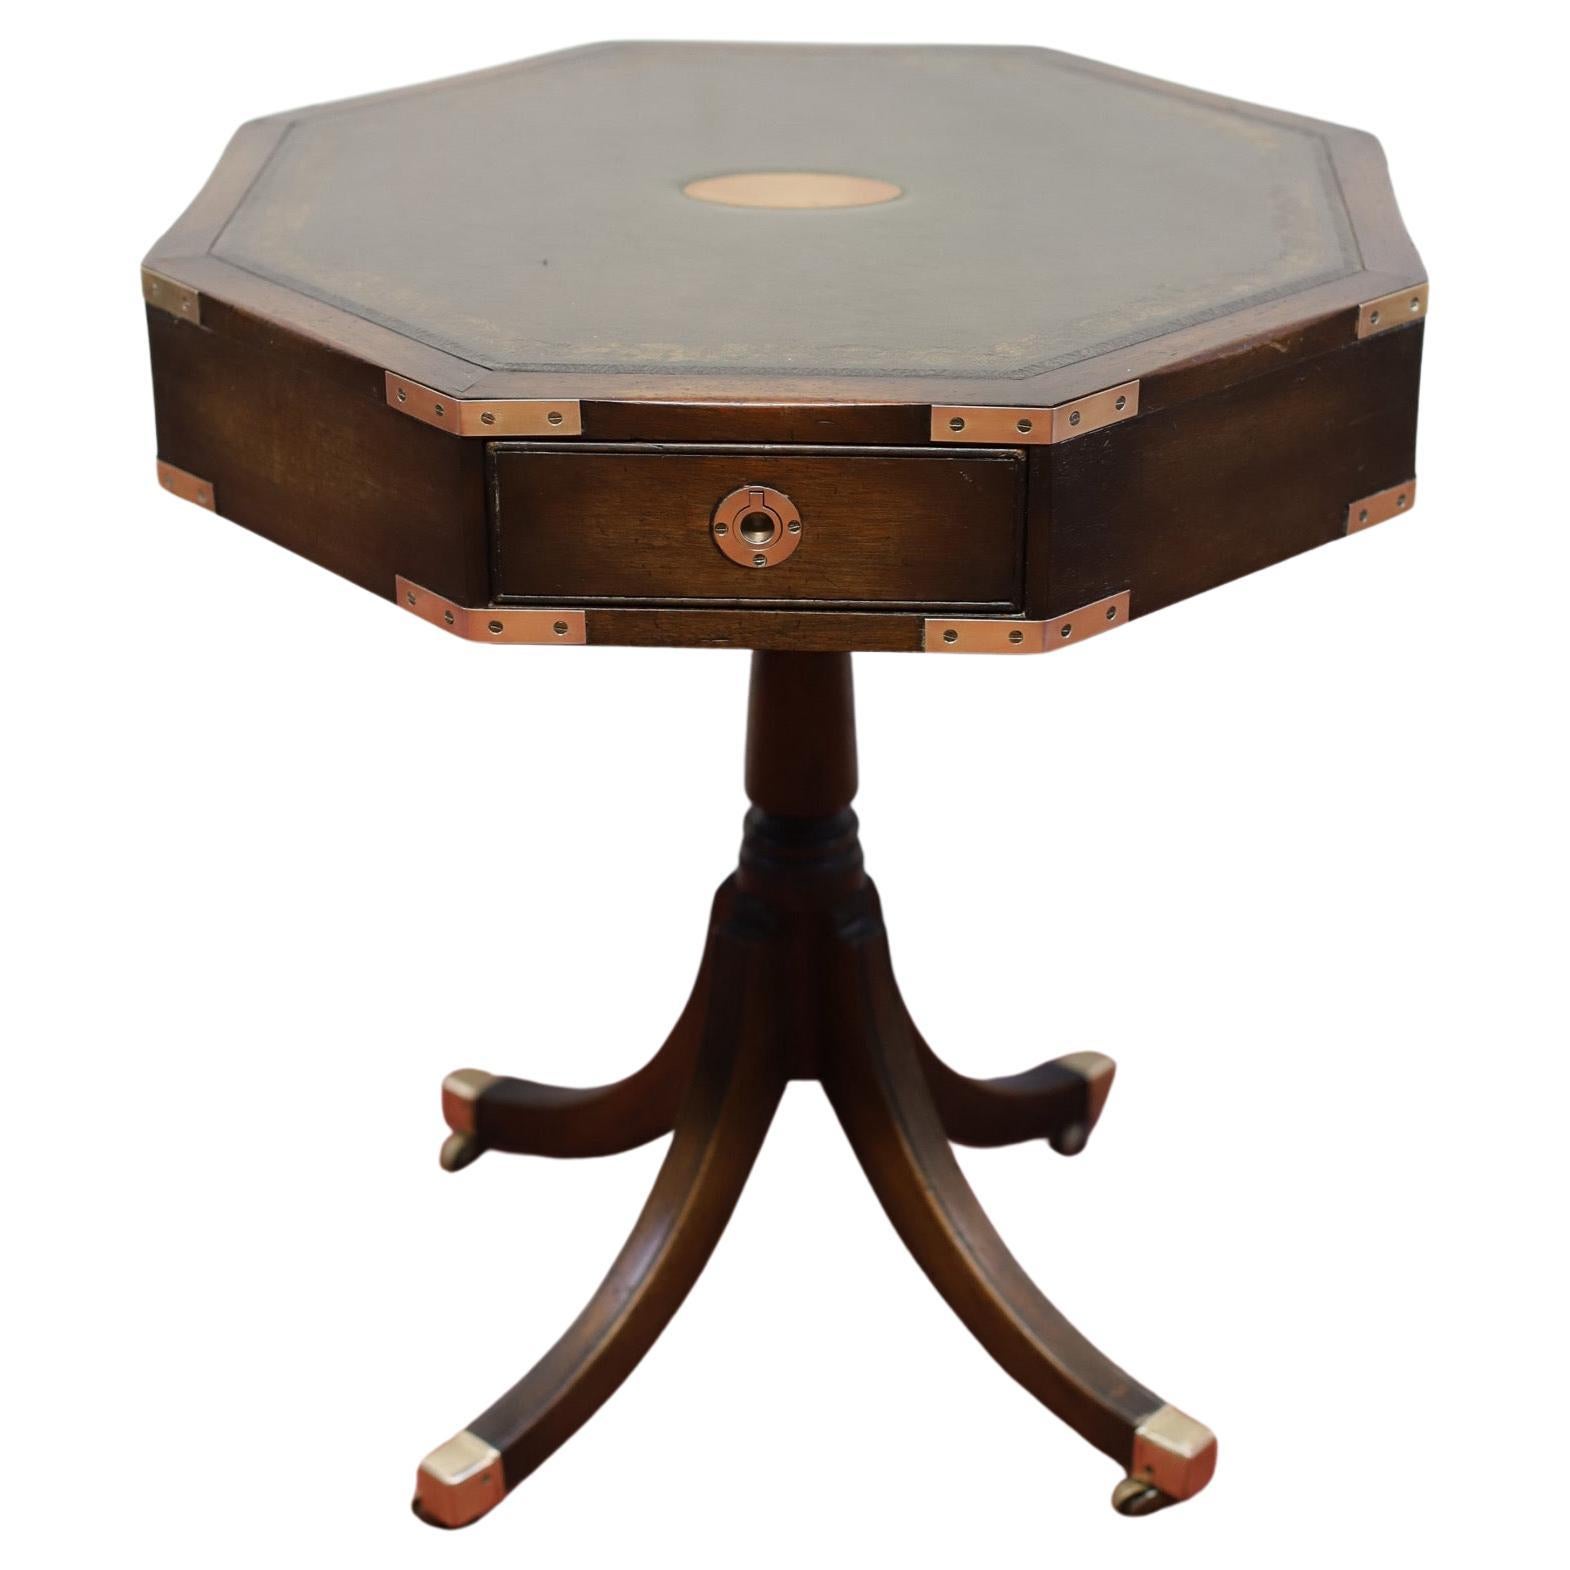 Bevan Funnell Ltd. Tables d'appoint